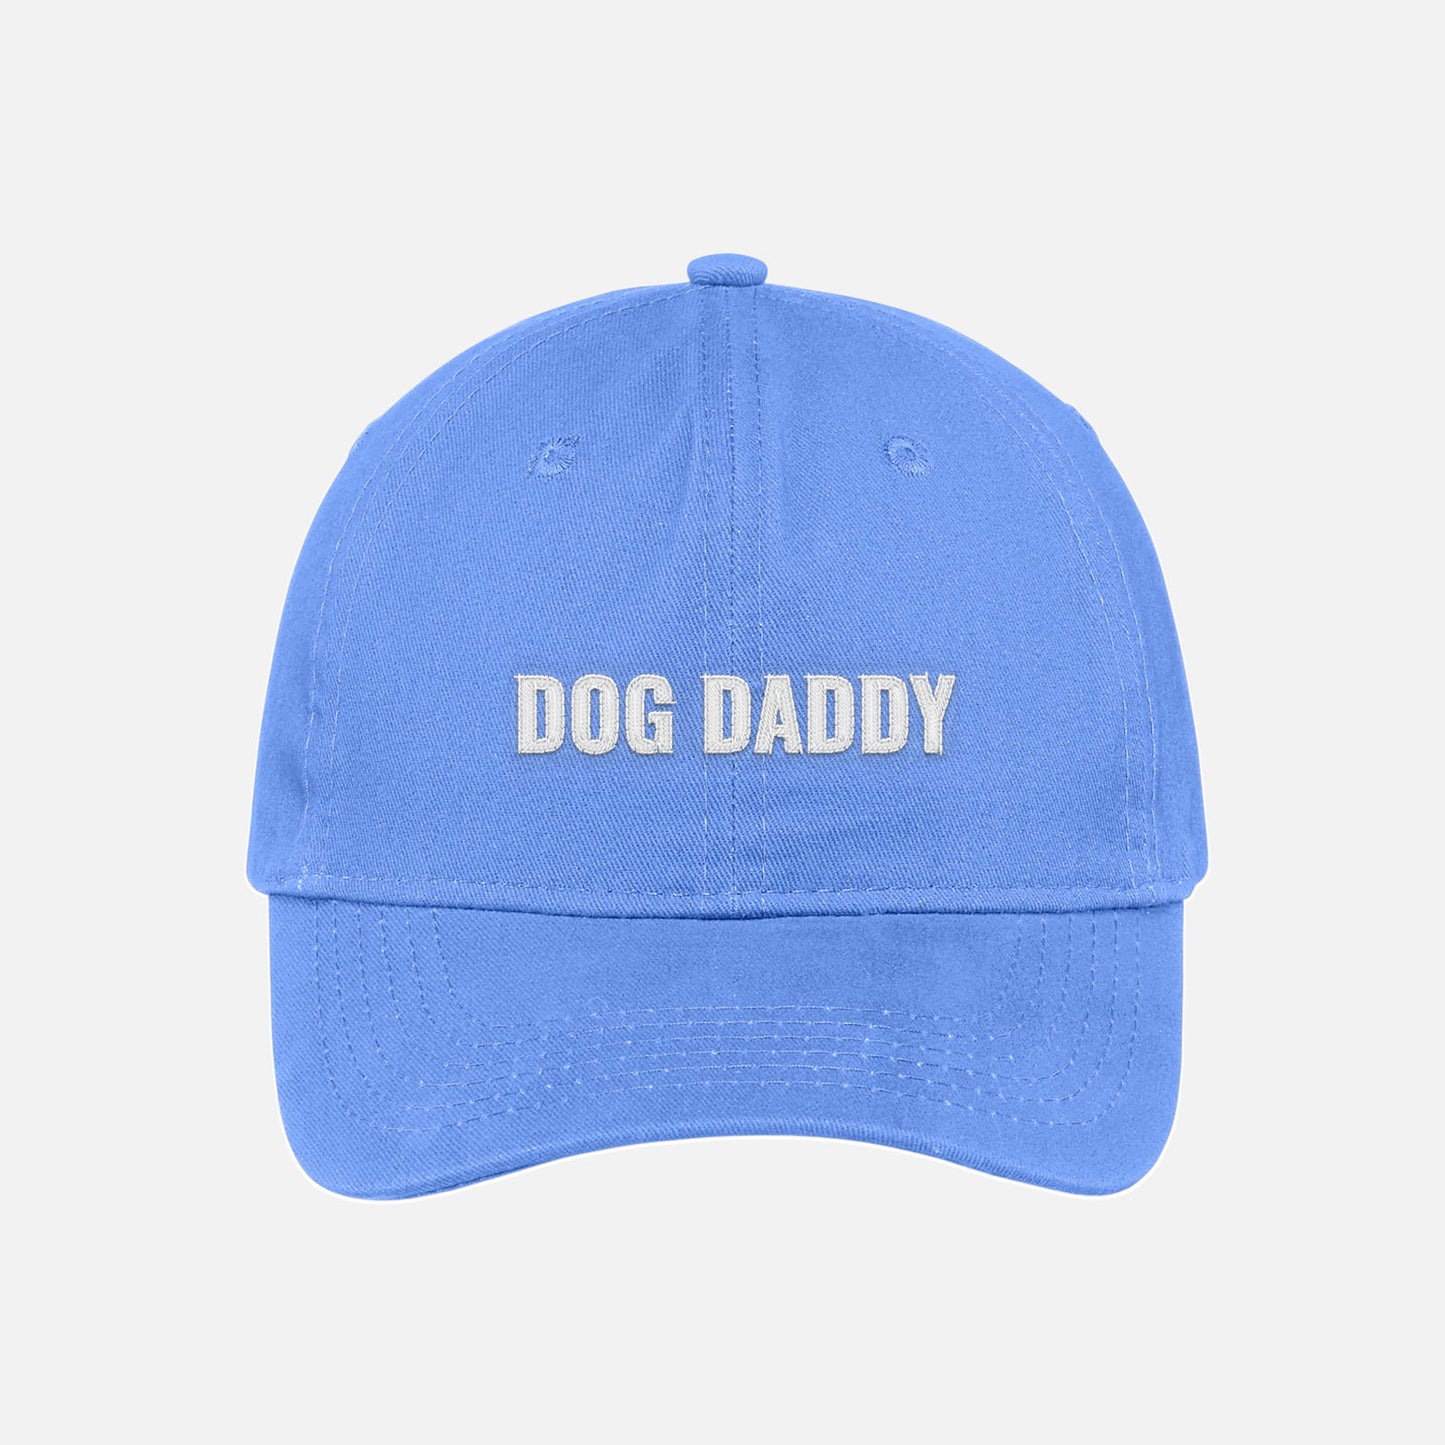 Carolina blue dog daddy dad hat embroidered baseball cap with white text.